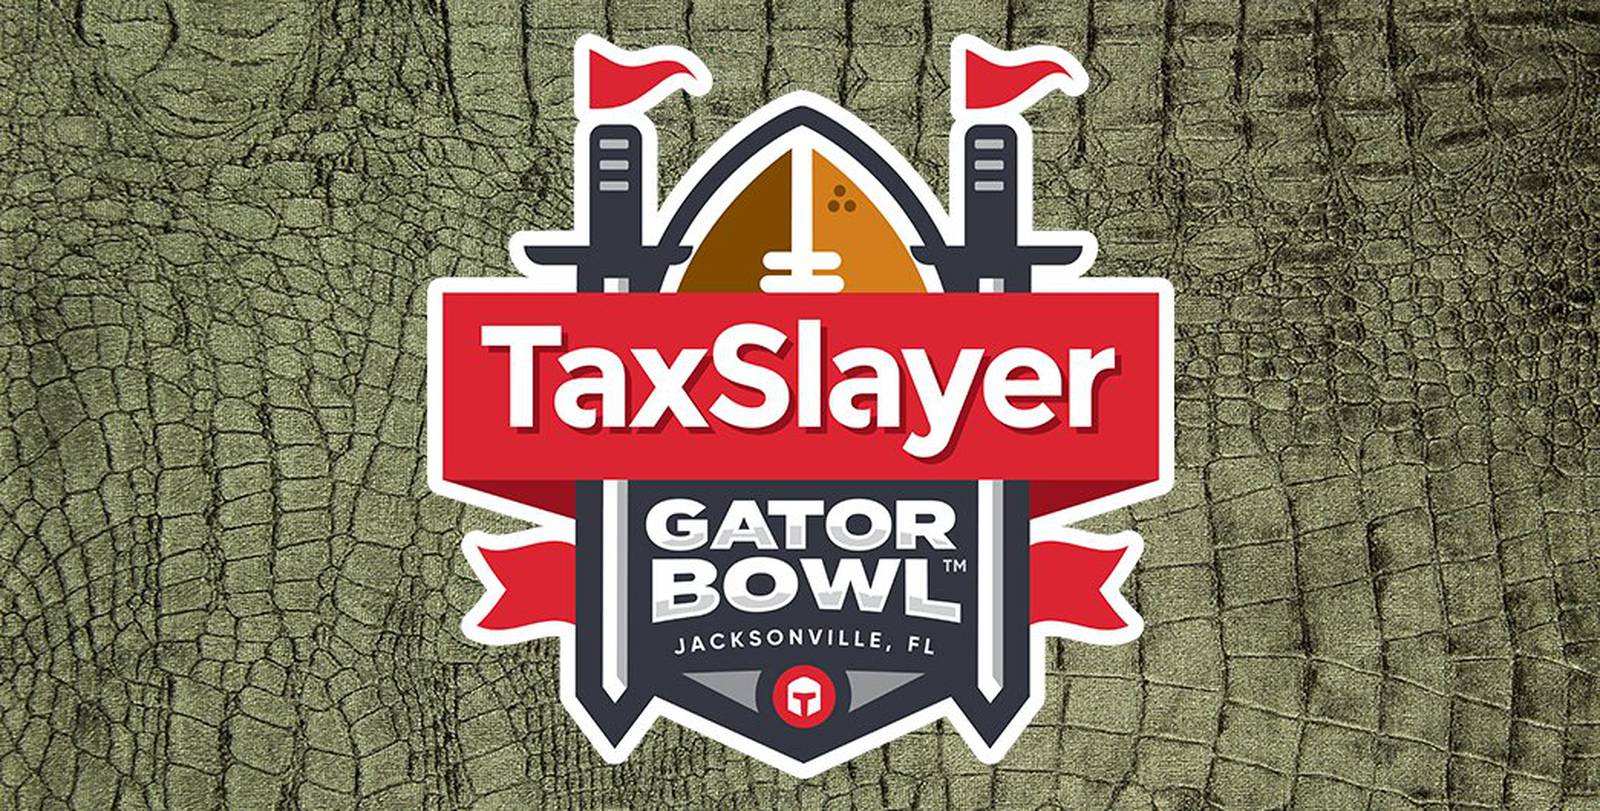 N.C. State and Texas A&M get invites to TaxSlayer Gator Bowl 104.5 WOKV